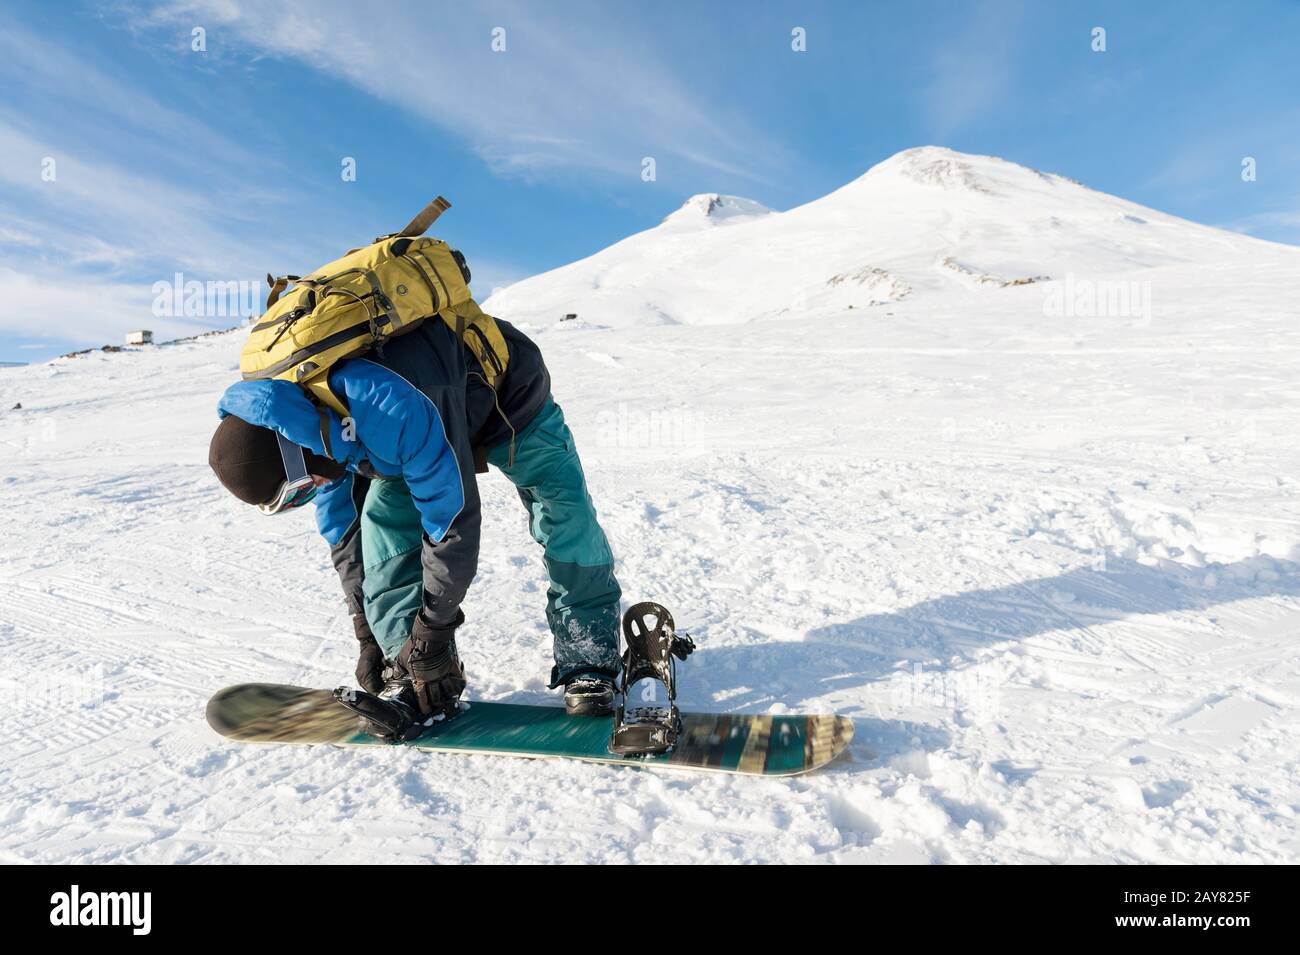 A snowboarder with a backpack on his back fastens snowboard bindings Stock Photo